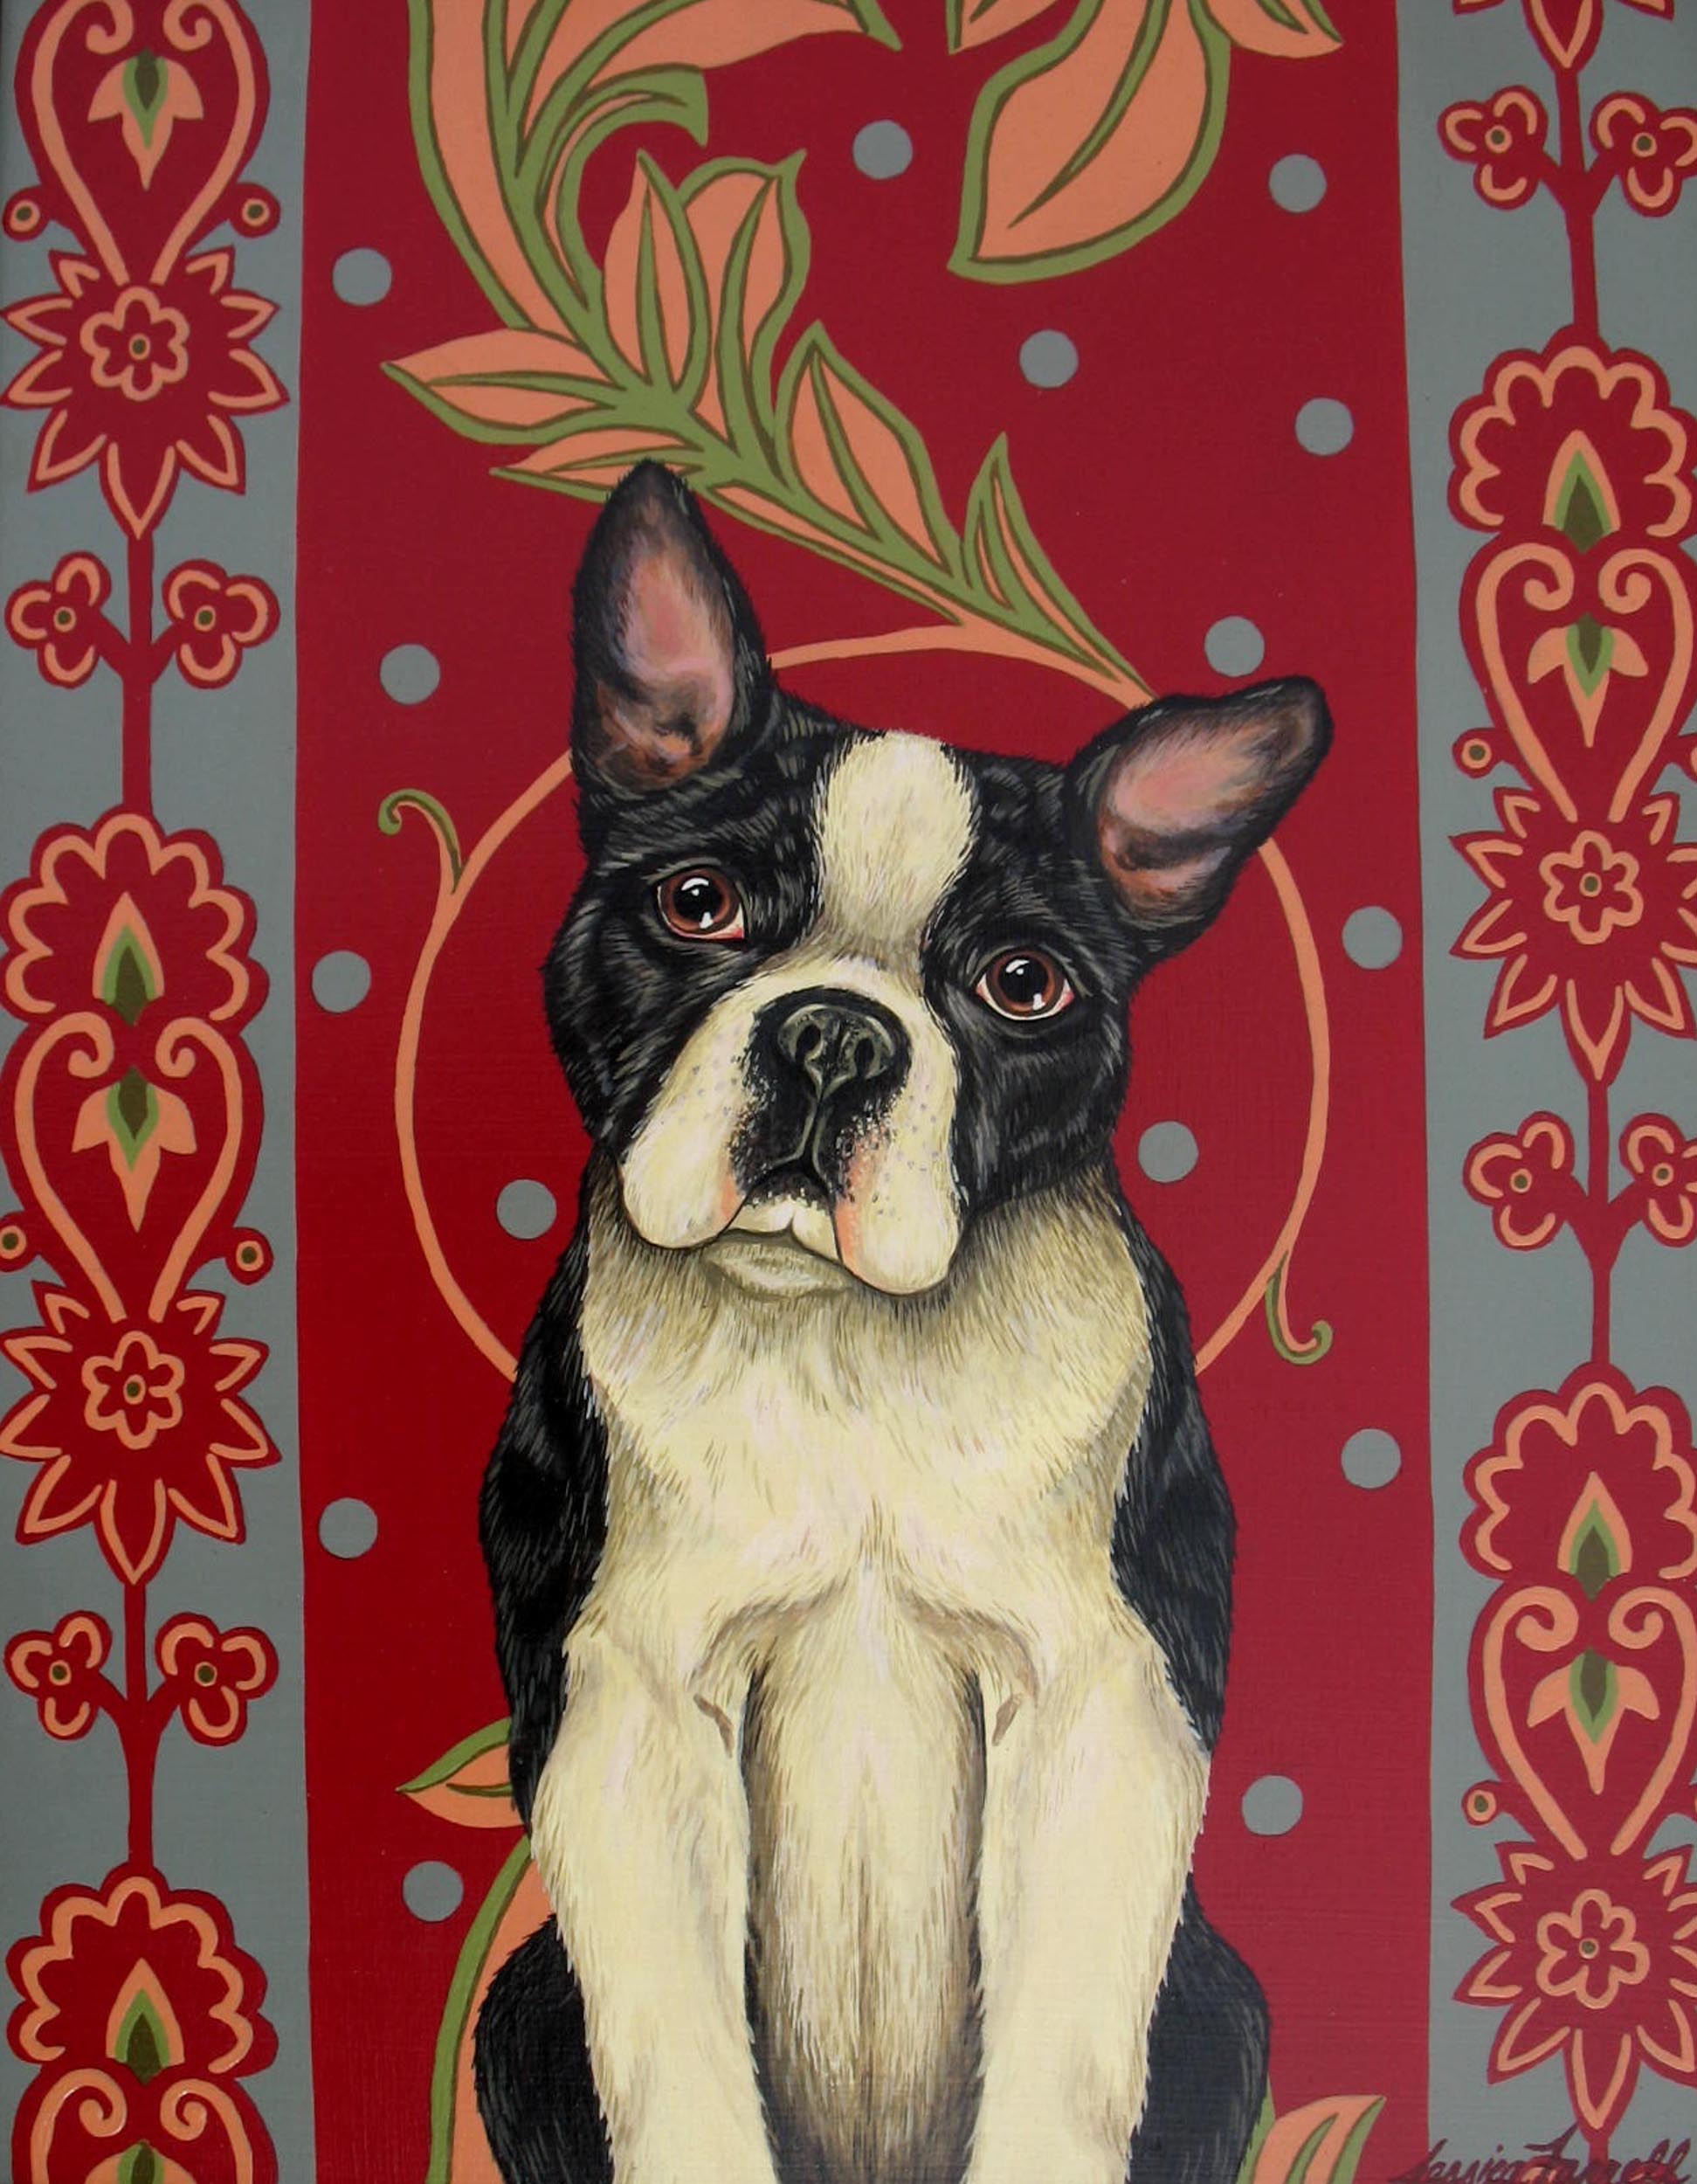   Boston Terrier , Acrylic on wood, 19 x 16 inches  (private collection) 